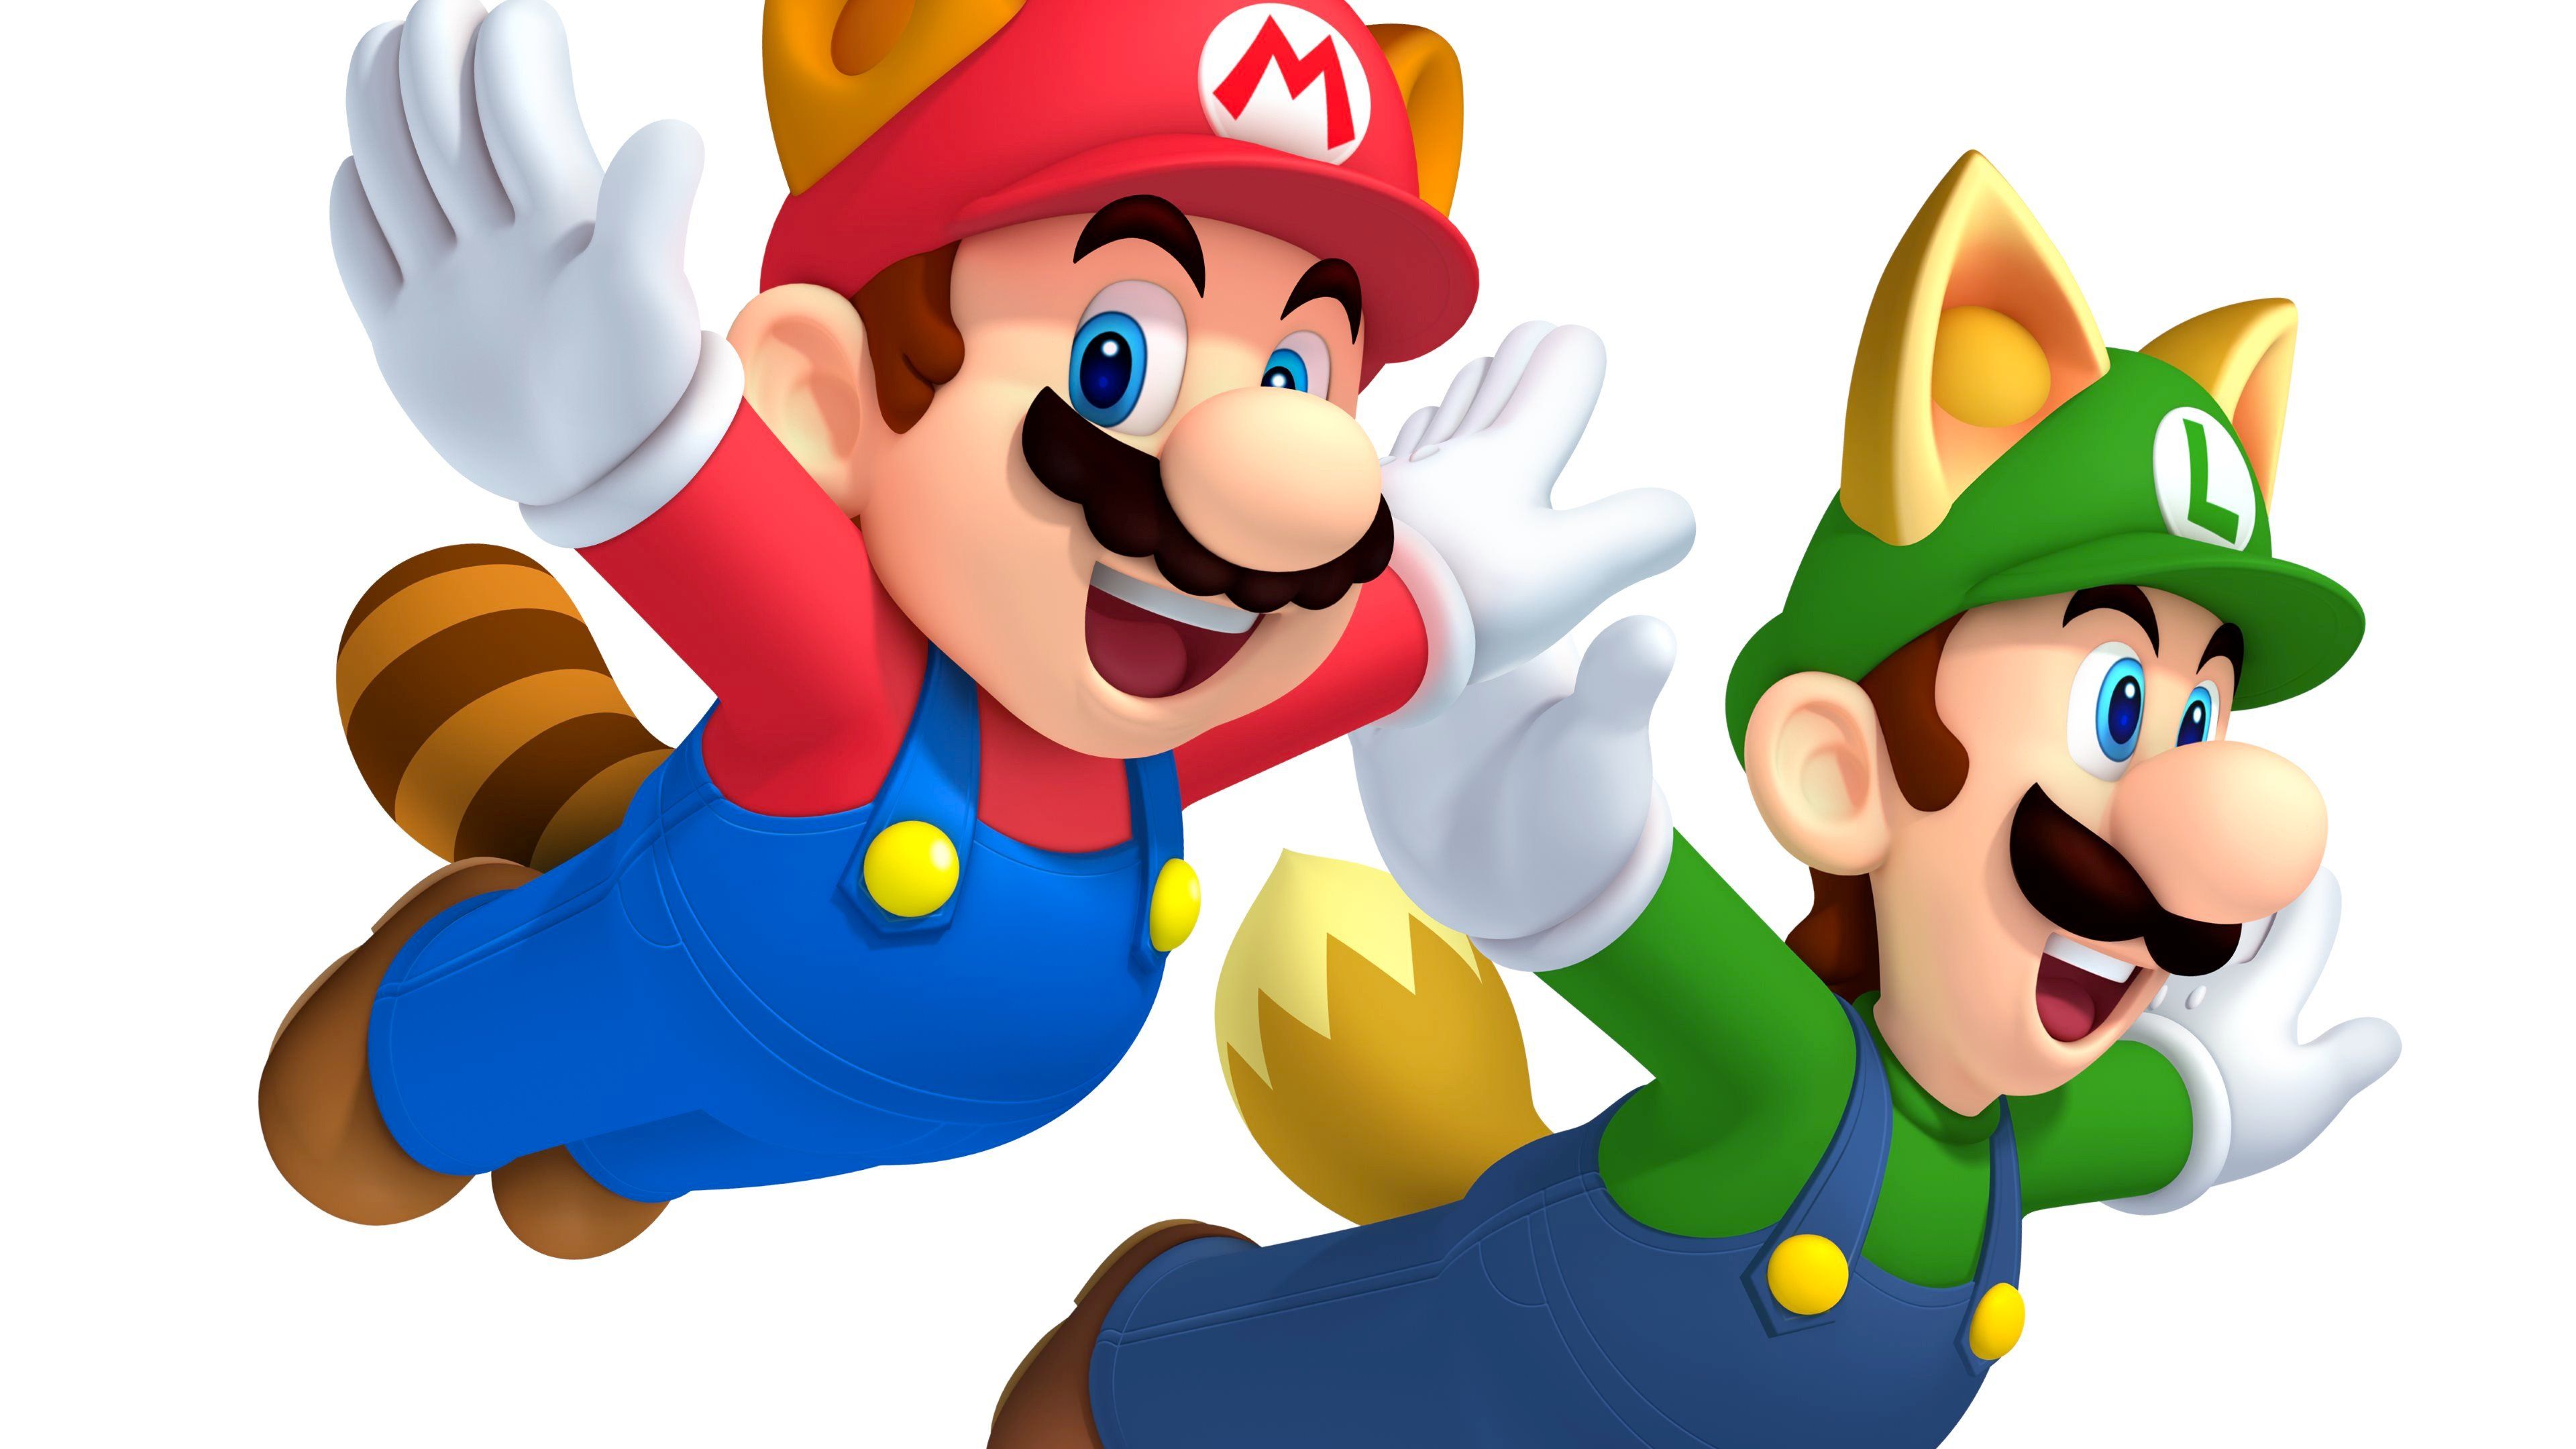 Free download Super Mario Luigi Ultra HD Wallpapers 3840x2160 for your Desk...